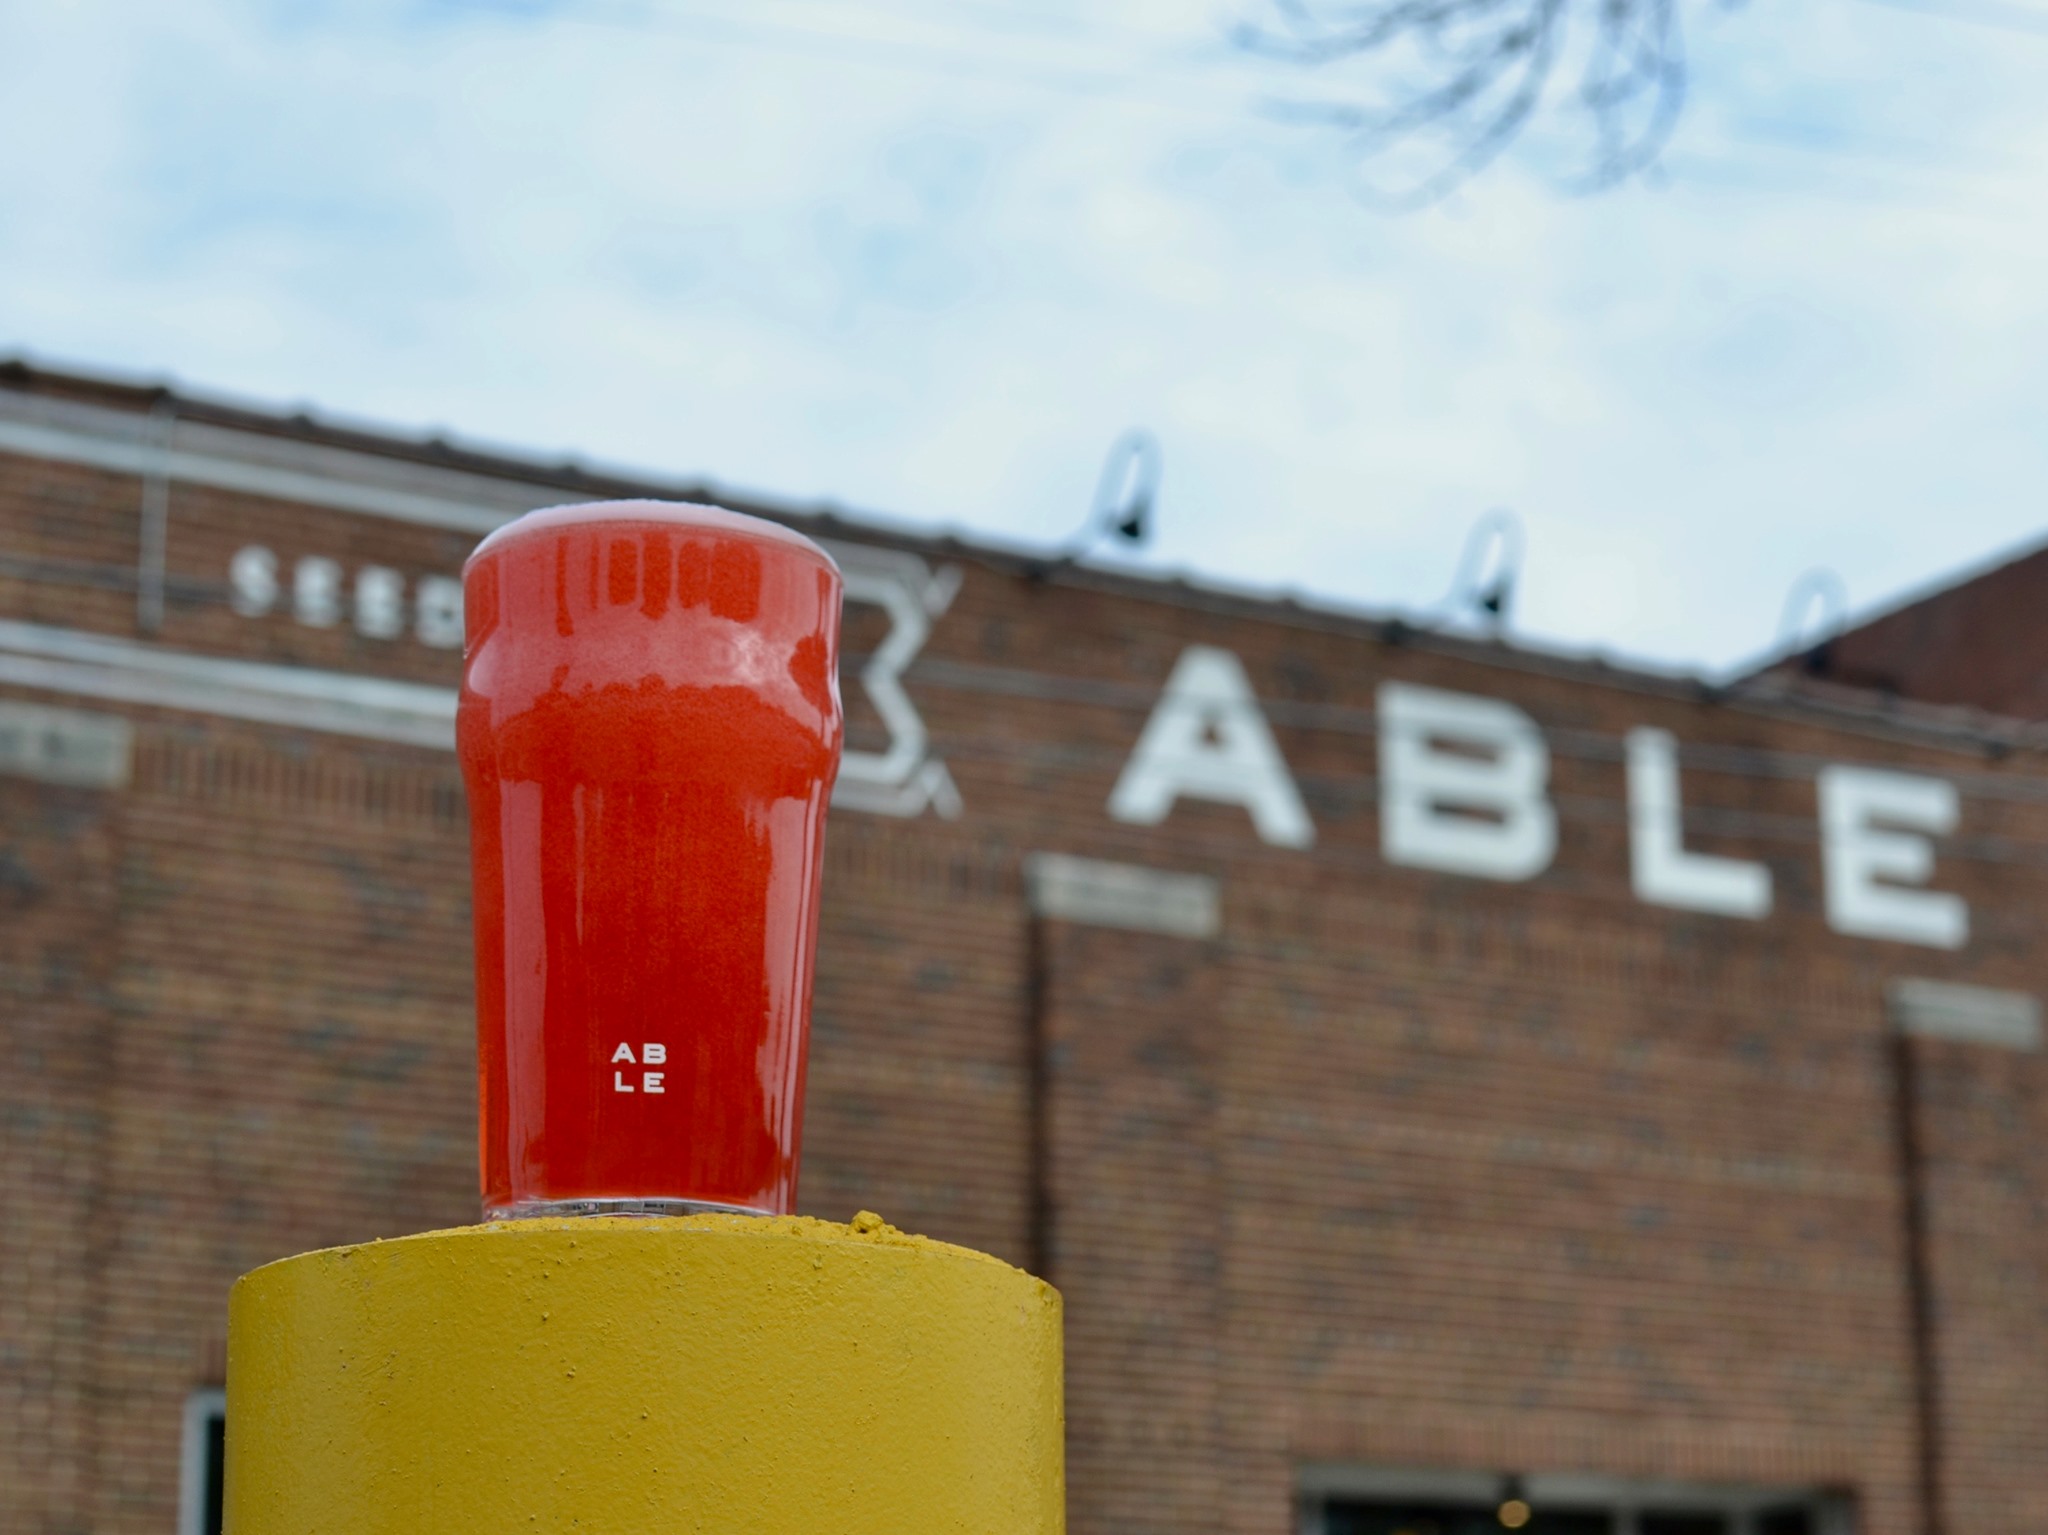 A reddish beer in a pint glass in front of a brick building with the word “Able” painted on it in white paint. 